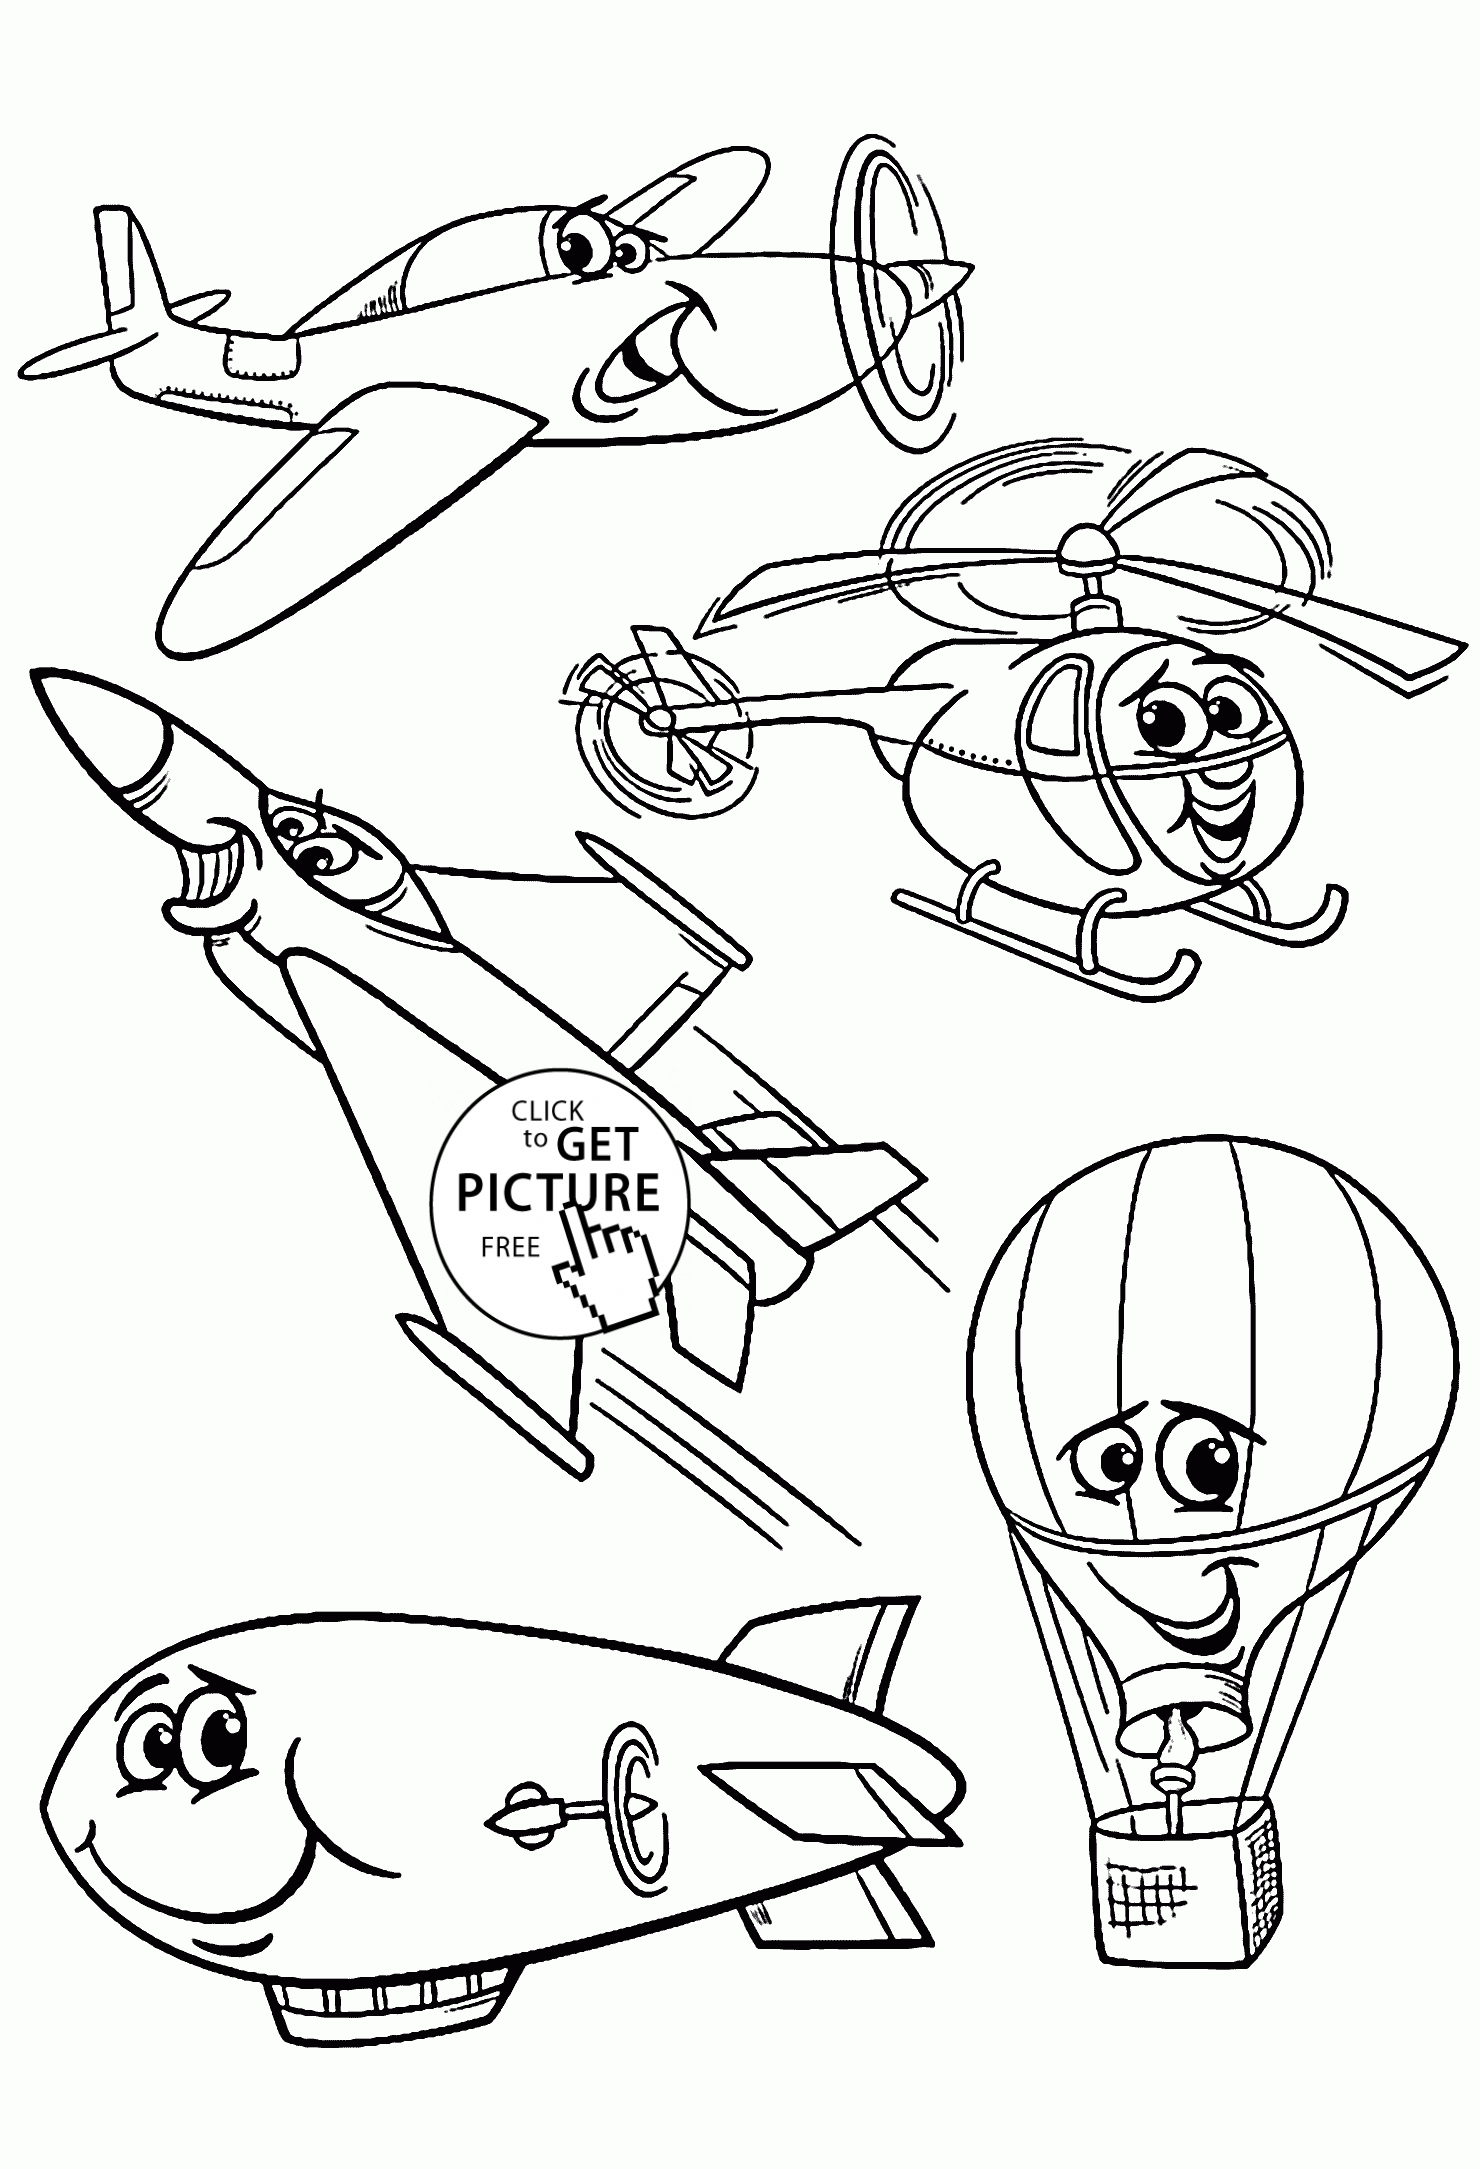 transportation coloring pages for kids cartoon air vehicles coloring page for kids for transportation coloring kids pages 